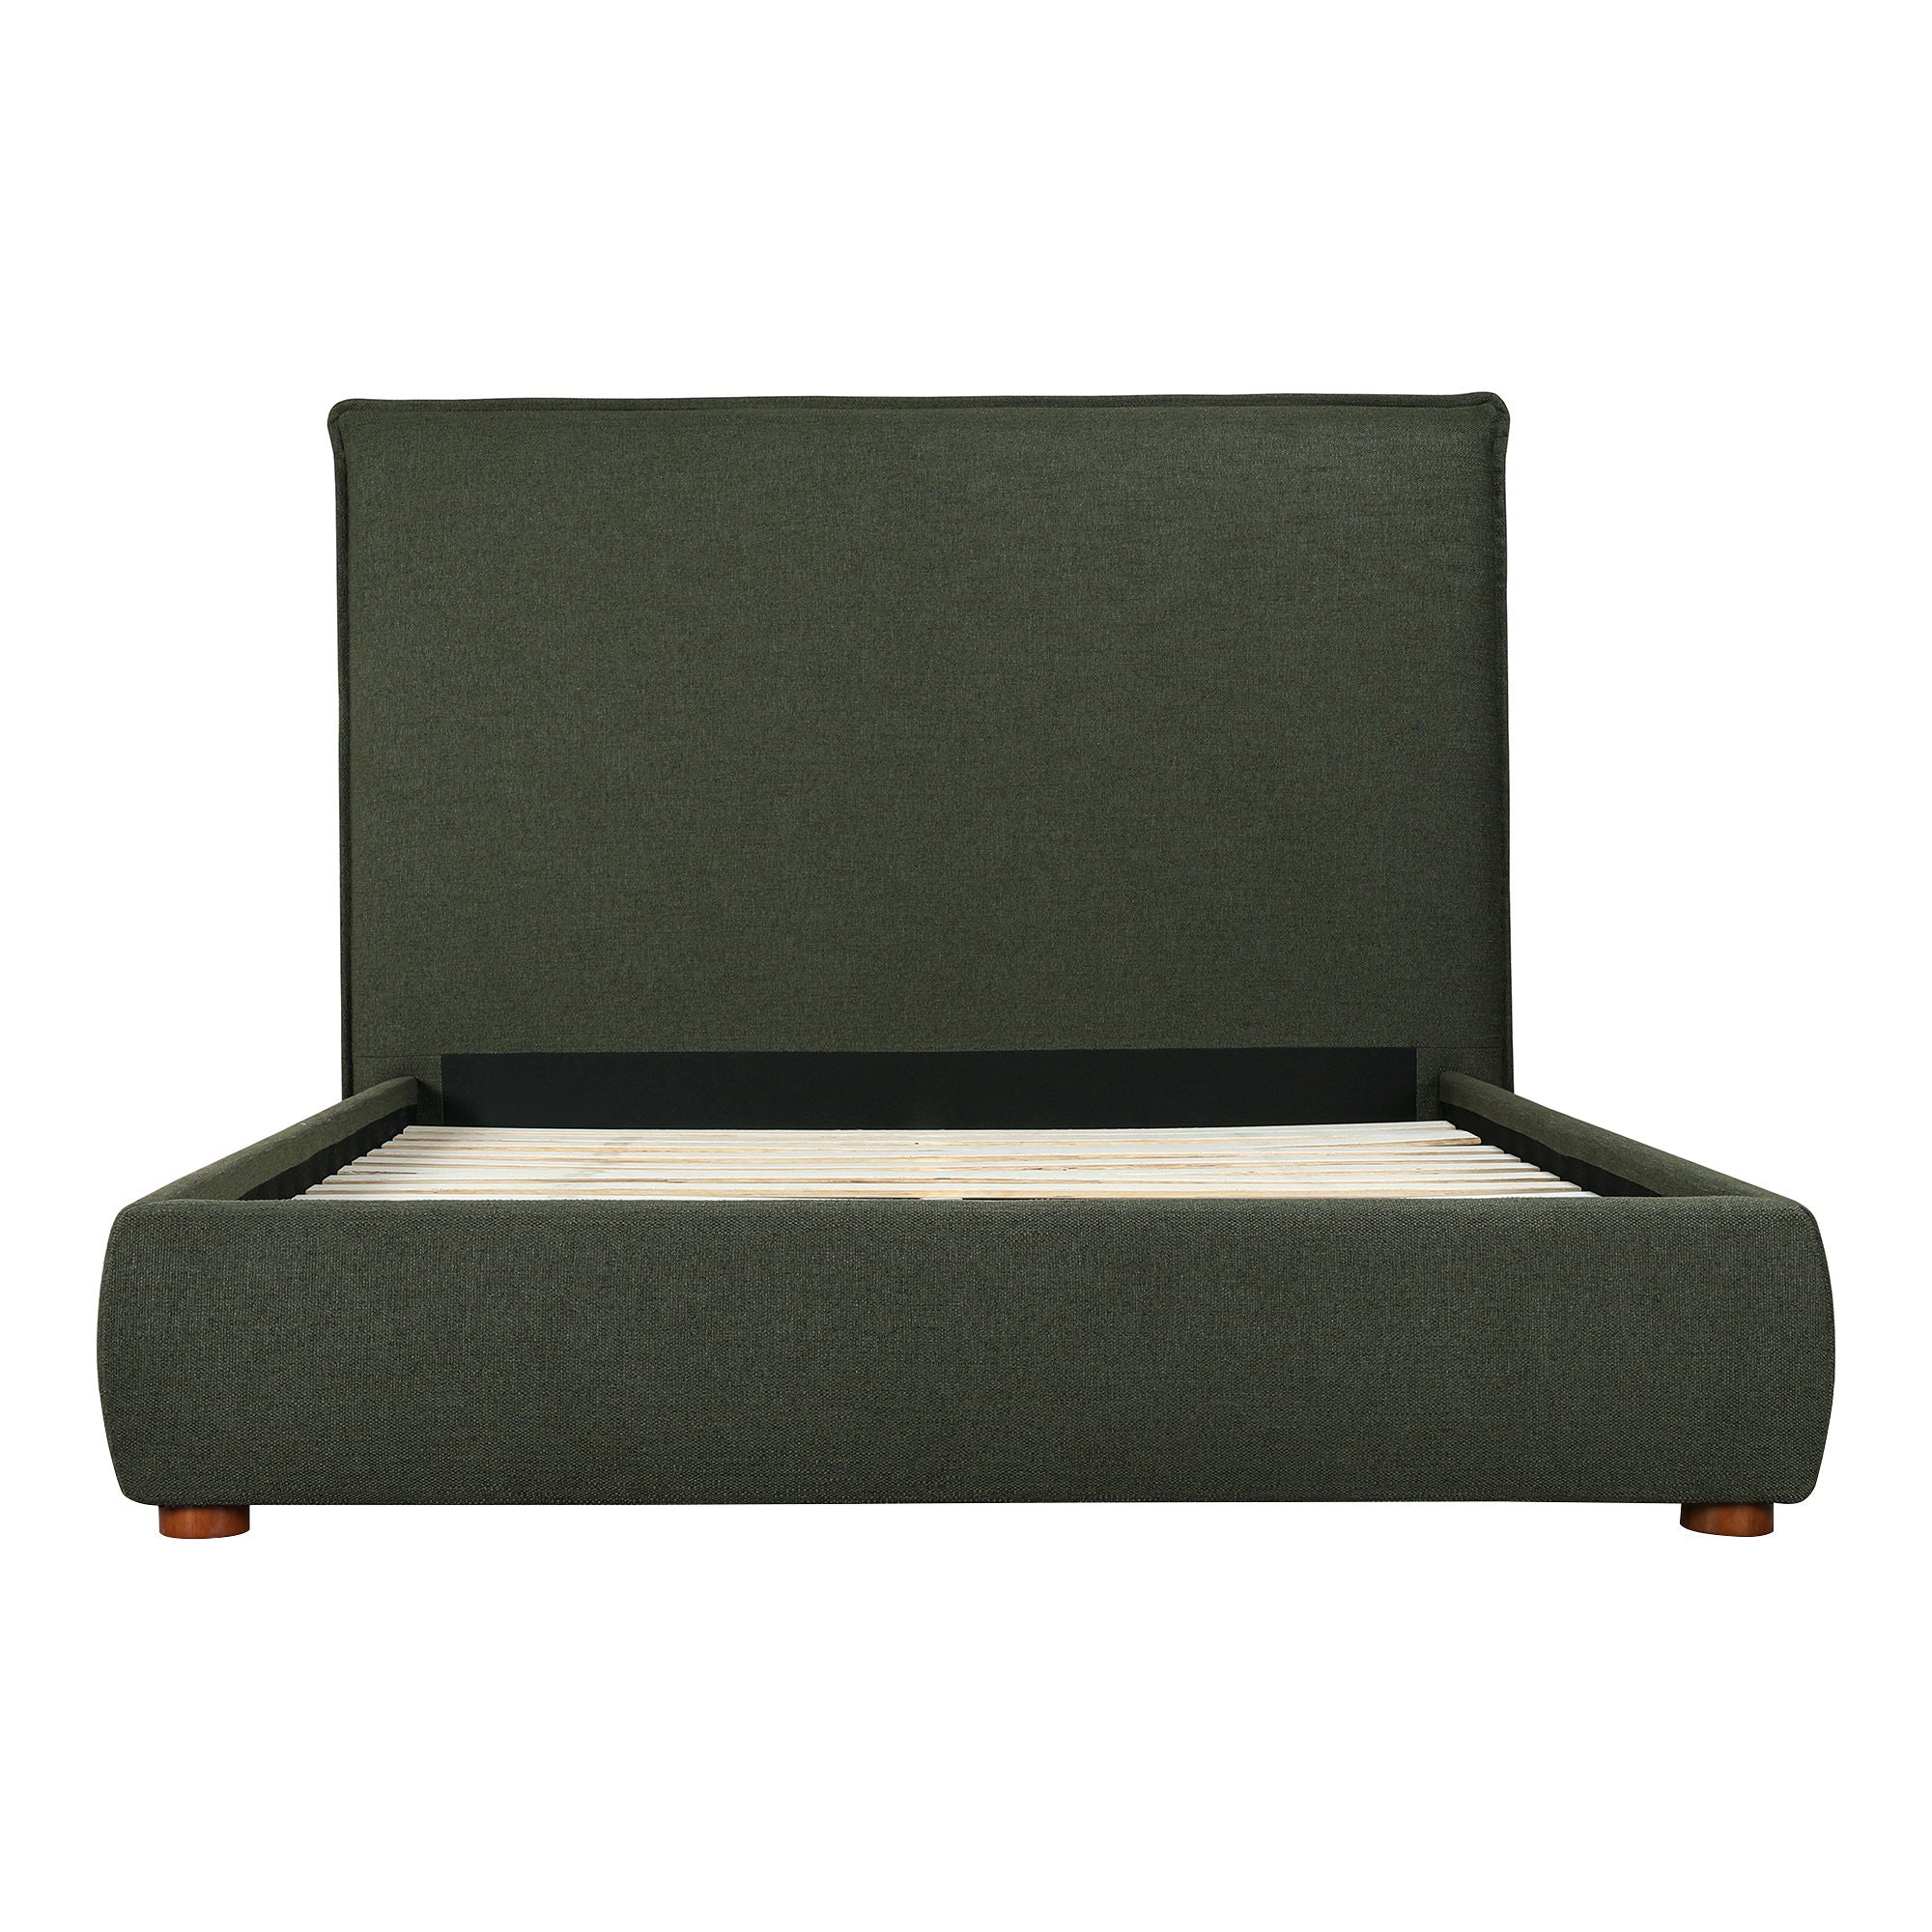 Luzon - King Bed Tall Headboard - Deep Forest